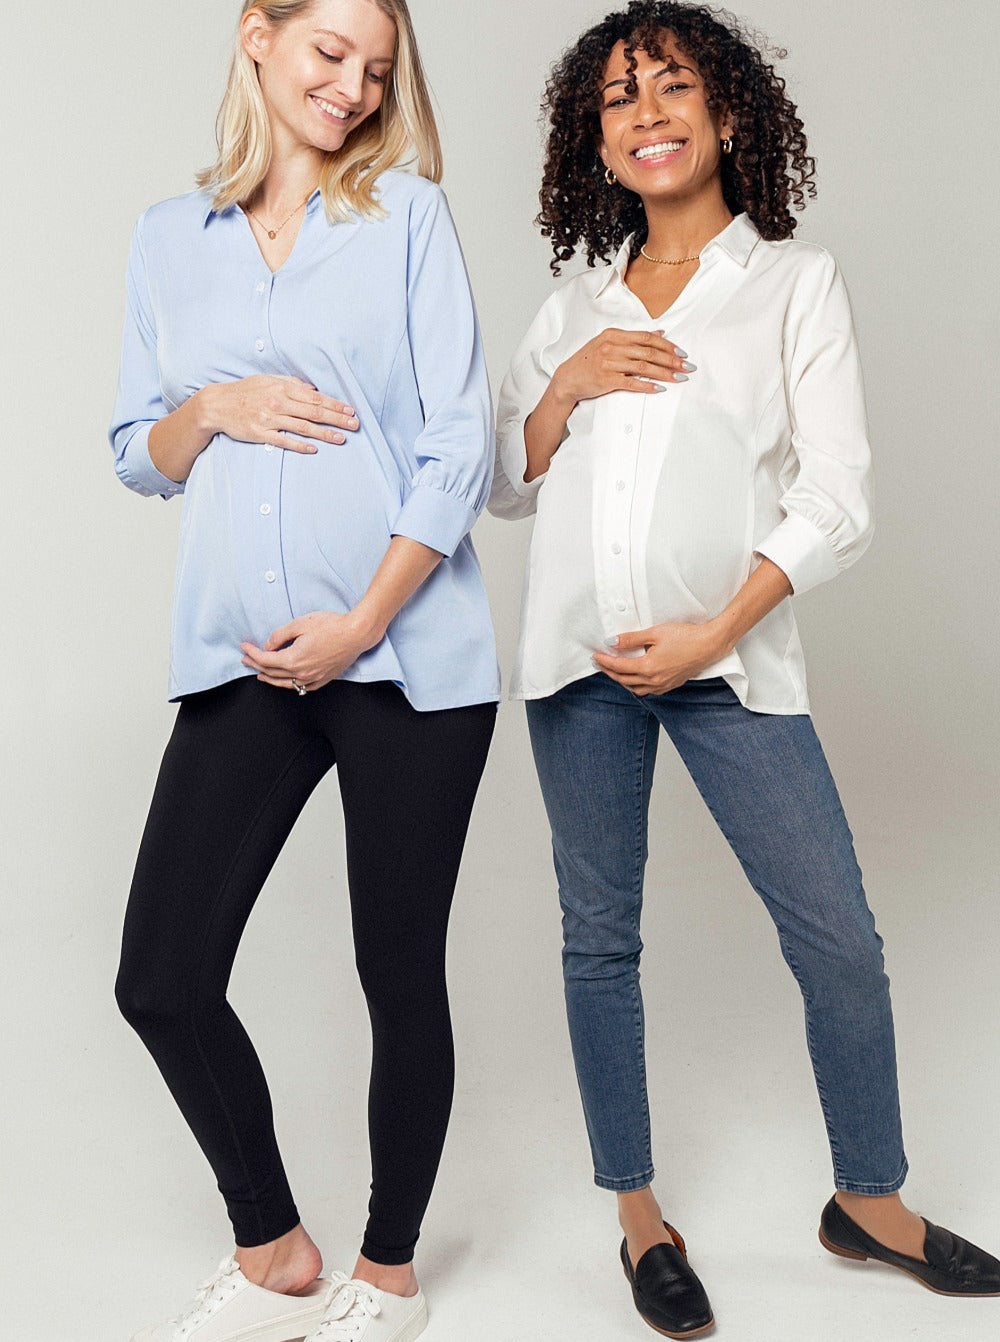 White maternity button down shirt for pregnancy and nursing. Maternity workwear top with no gap technology. Cut with luxury sustainable TENCEL for the office, the courtroom, or Saturday errands. Petite and standard sizes.